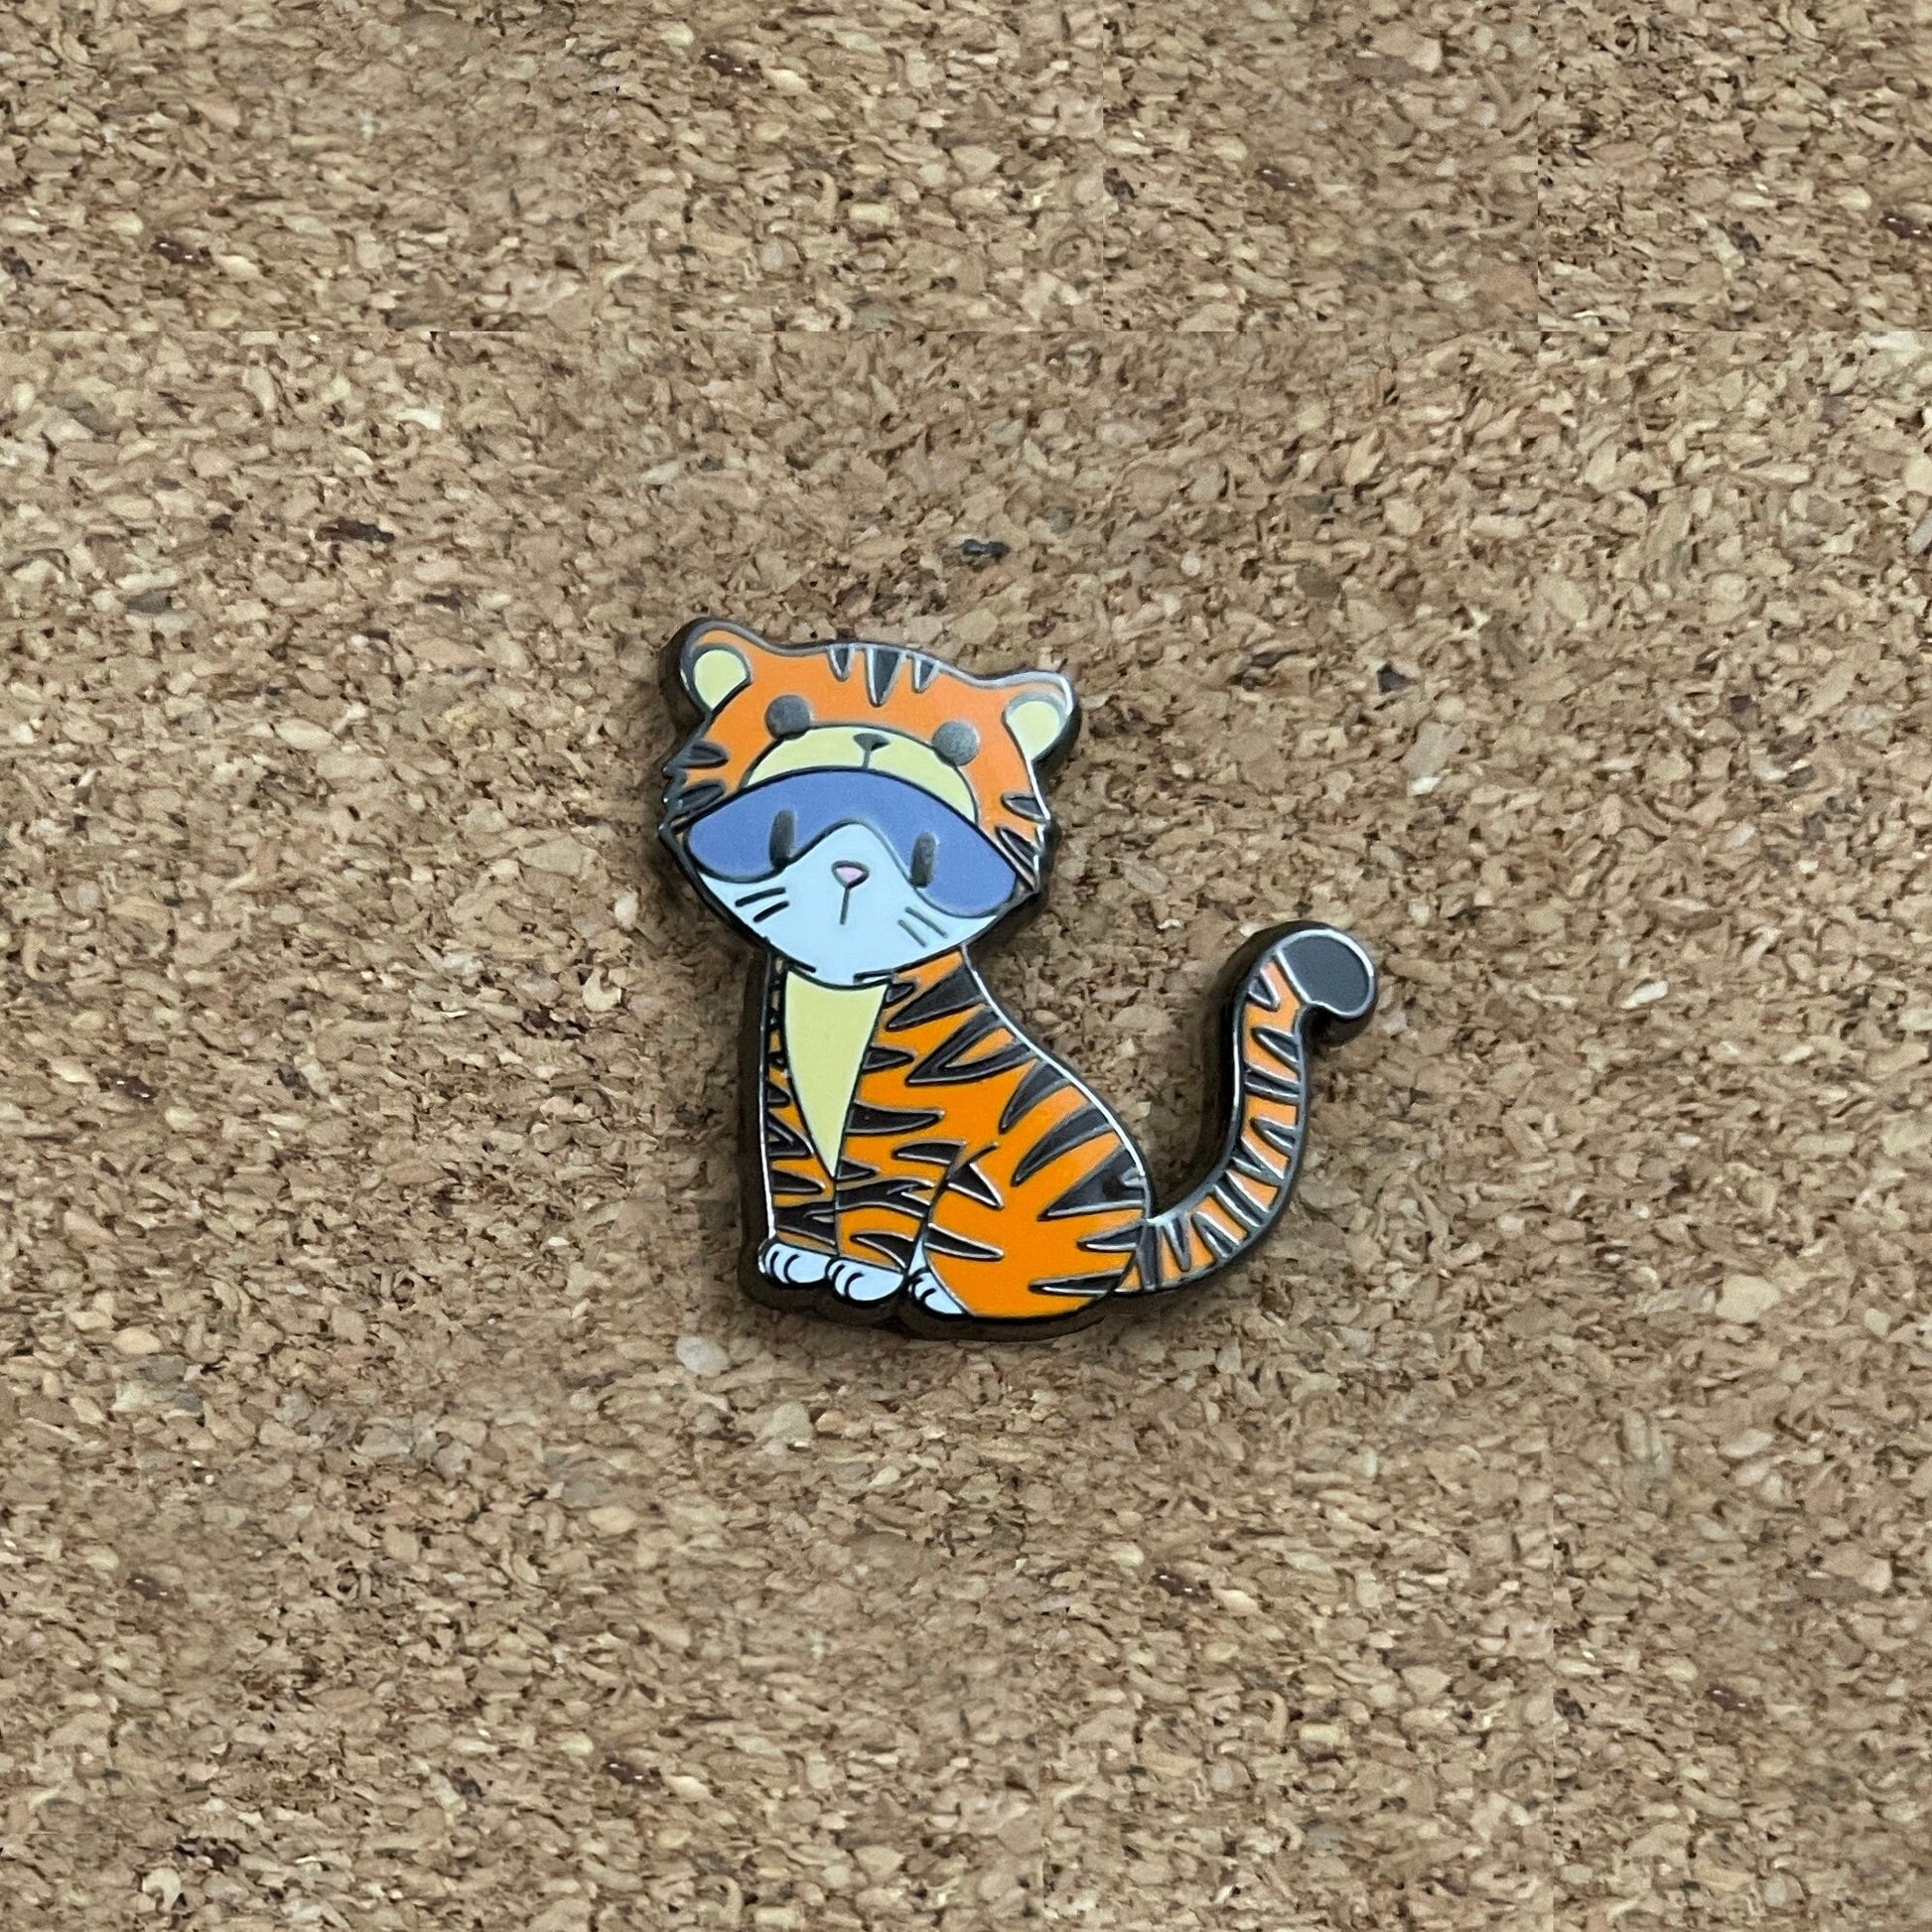 Kitty in Tiger Suit/Costume - Small Enamel Pin, Pins, Brooches & Lapel Pins